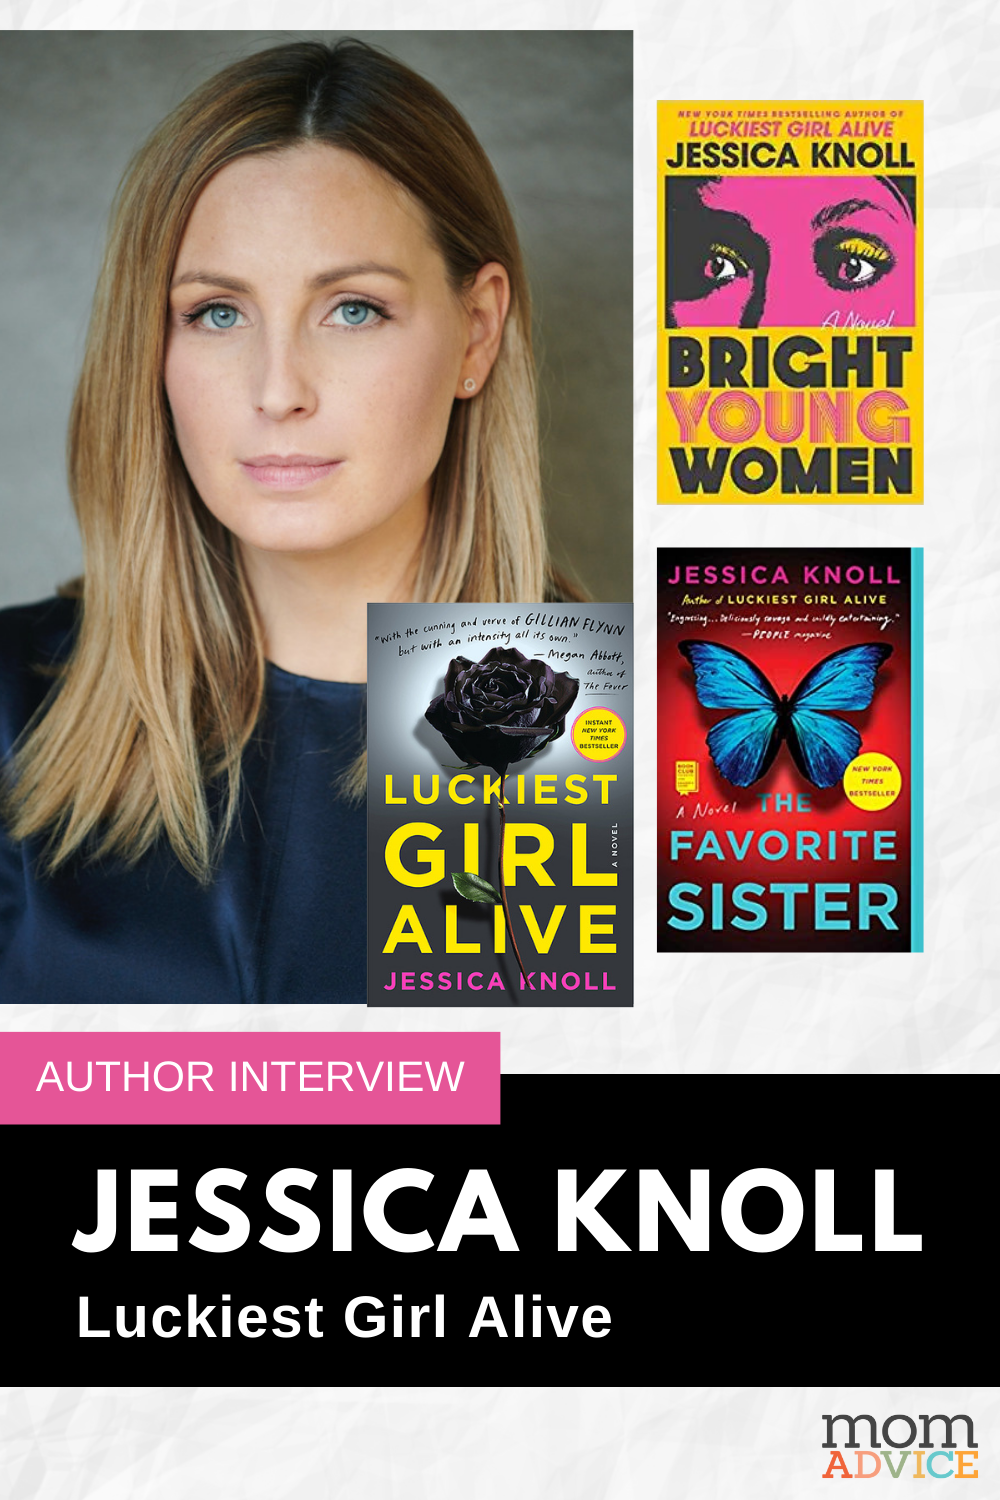 An Exclusive Jessica Knoll Interview (Luckiest Girl Alive)